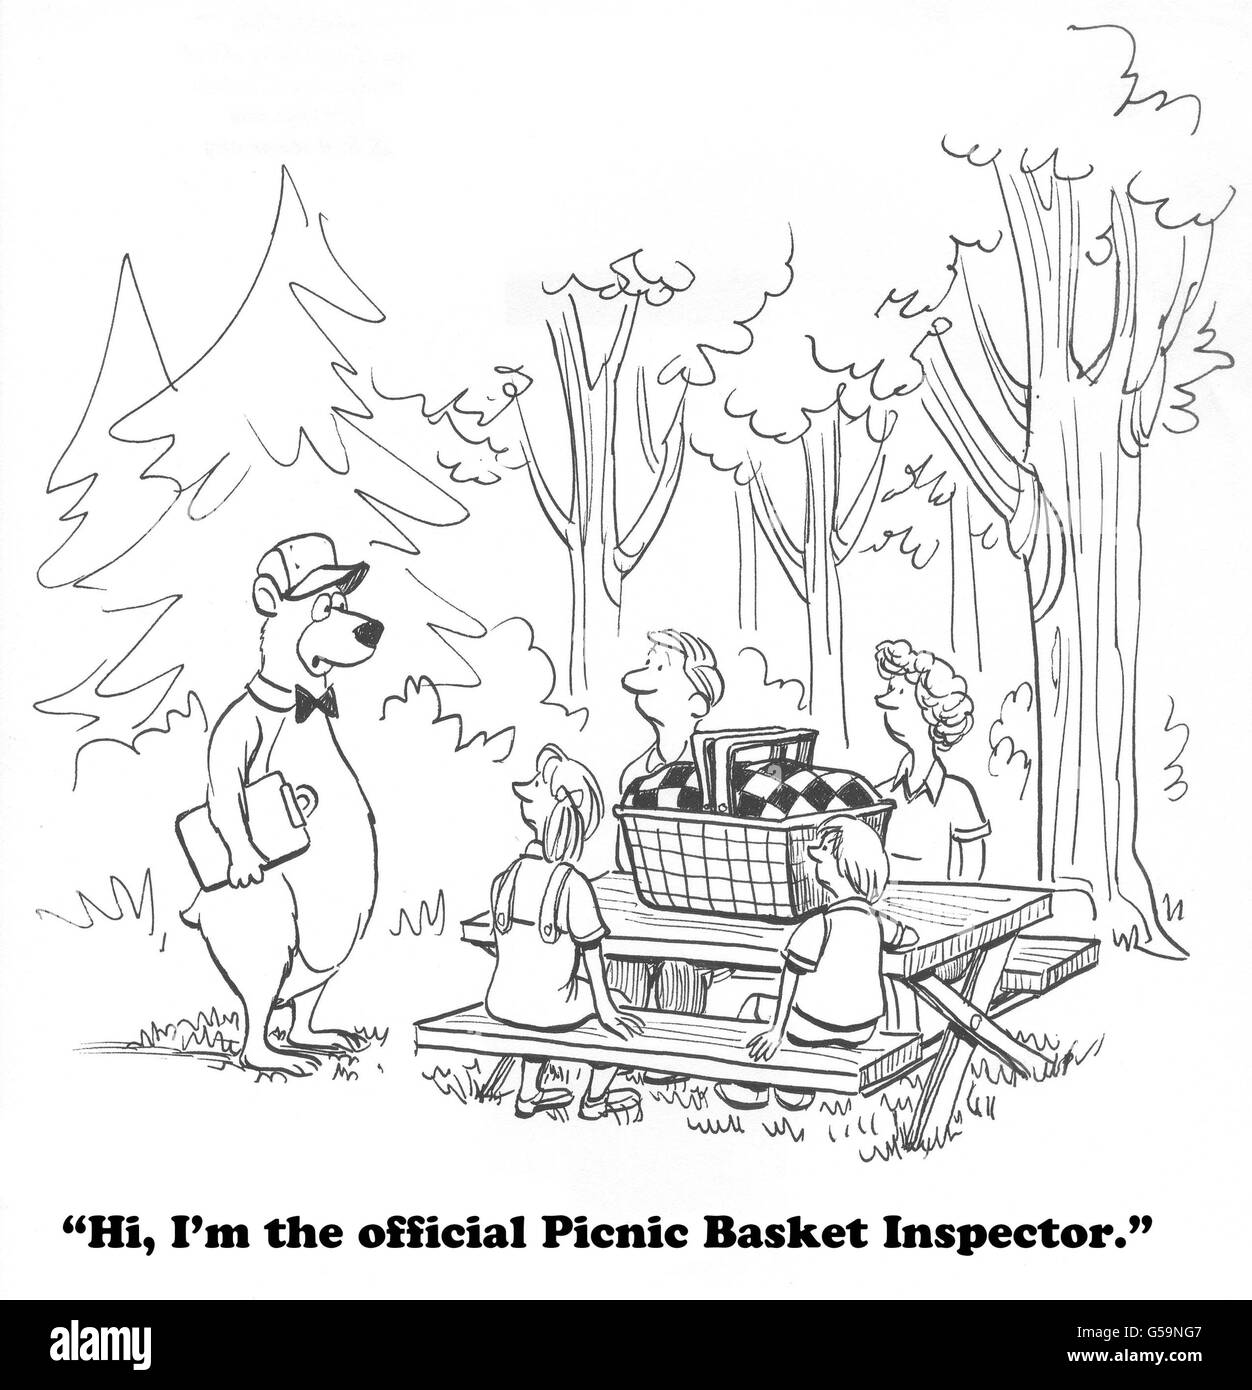 Cartoon of a bear who is the picnic basket inspector. Stock Photo